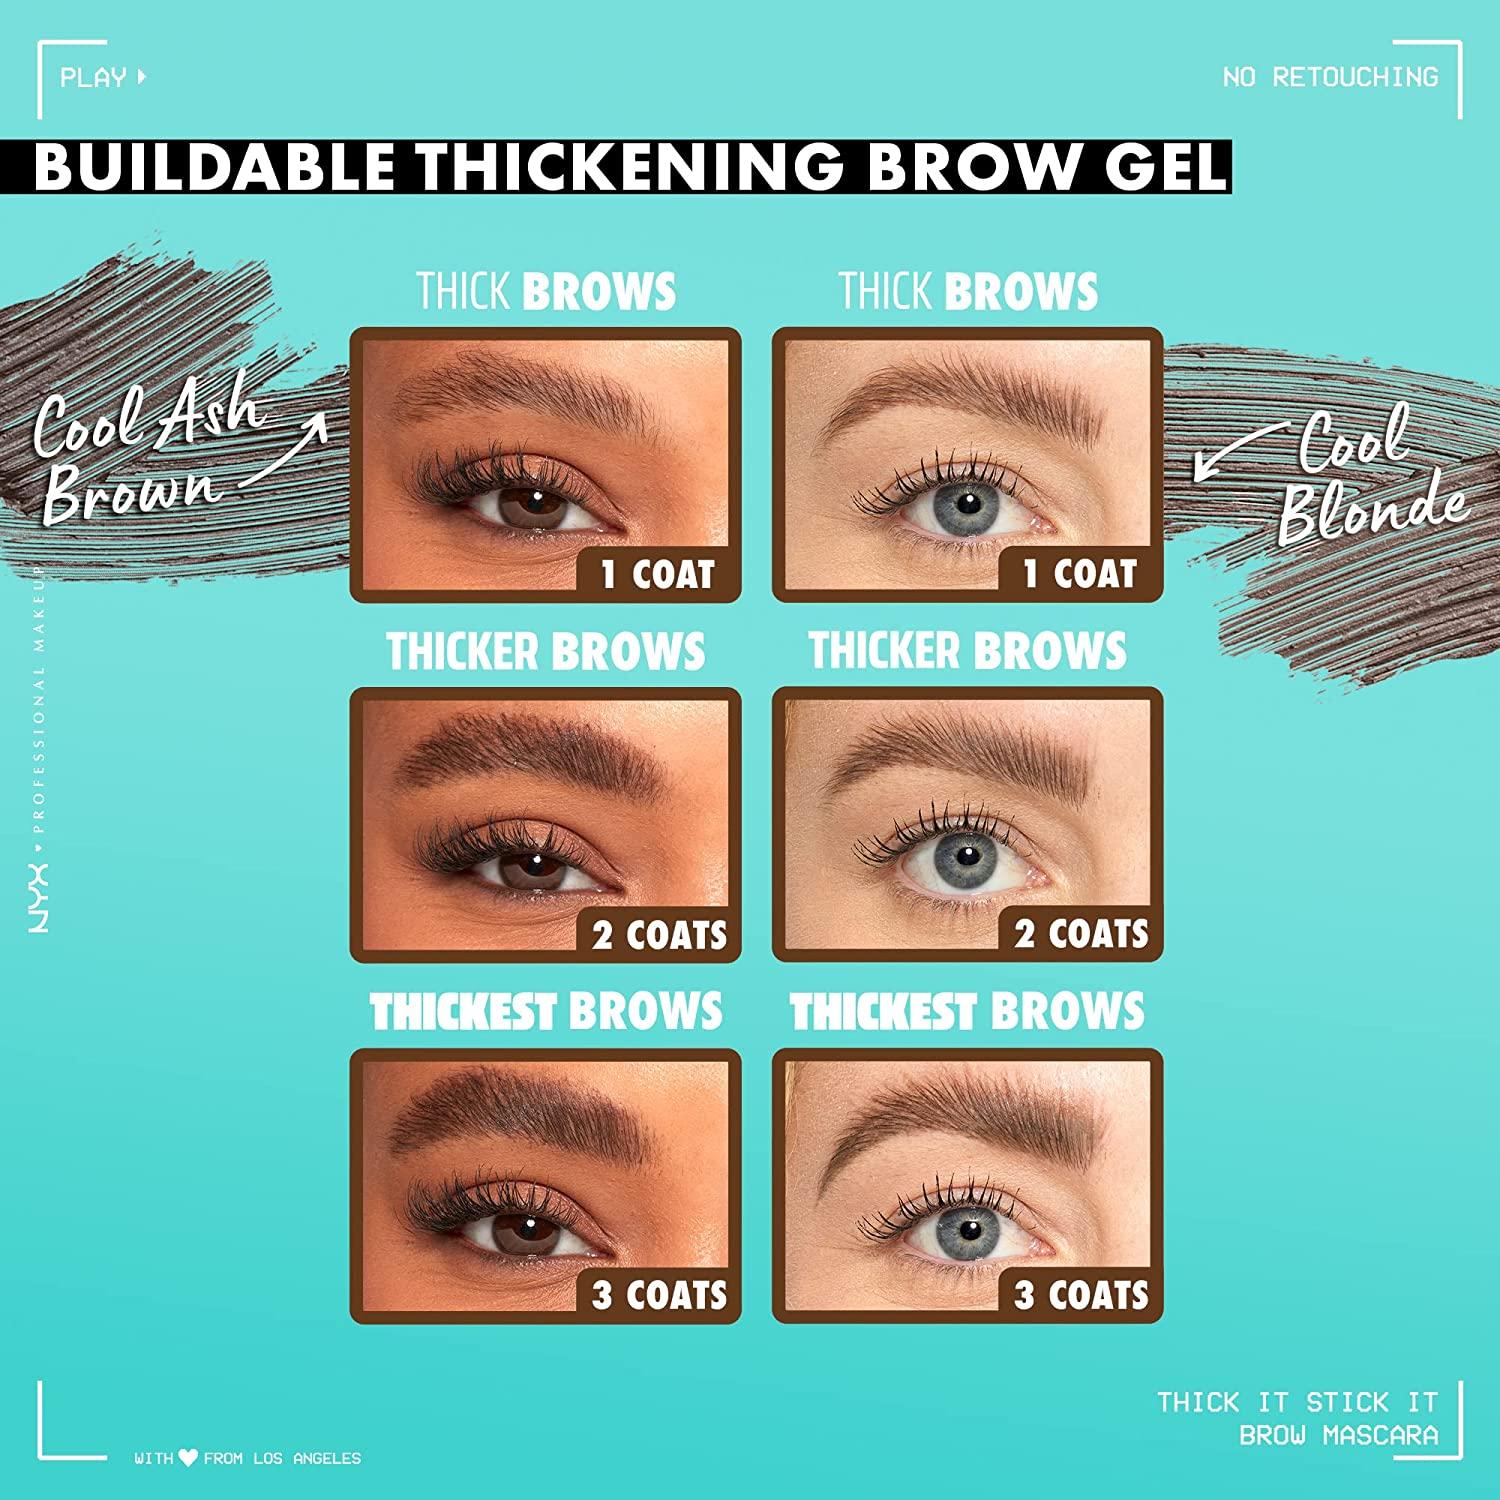 Stick It Thick - PROFESSIONAL 06 Brow Gel NYX Eyebrow MAKEUP Brunette Brunette Thickening It Mascara,